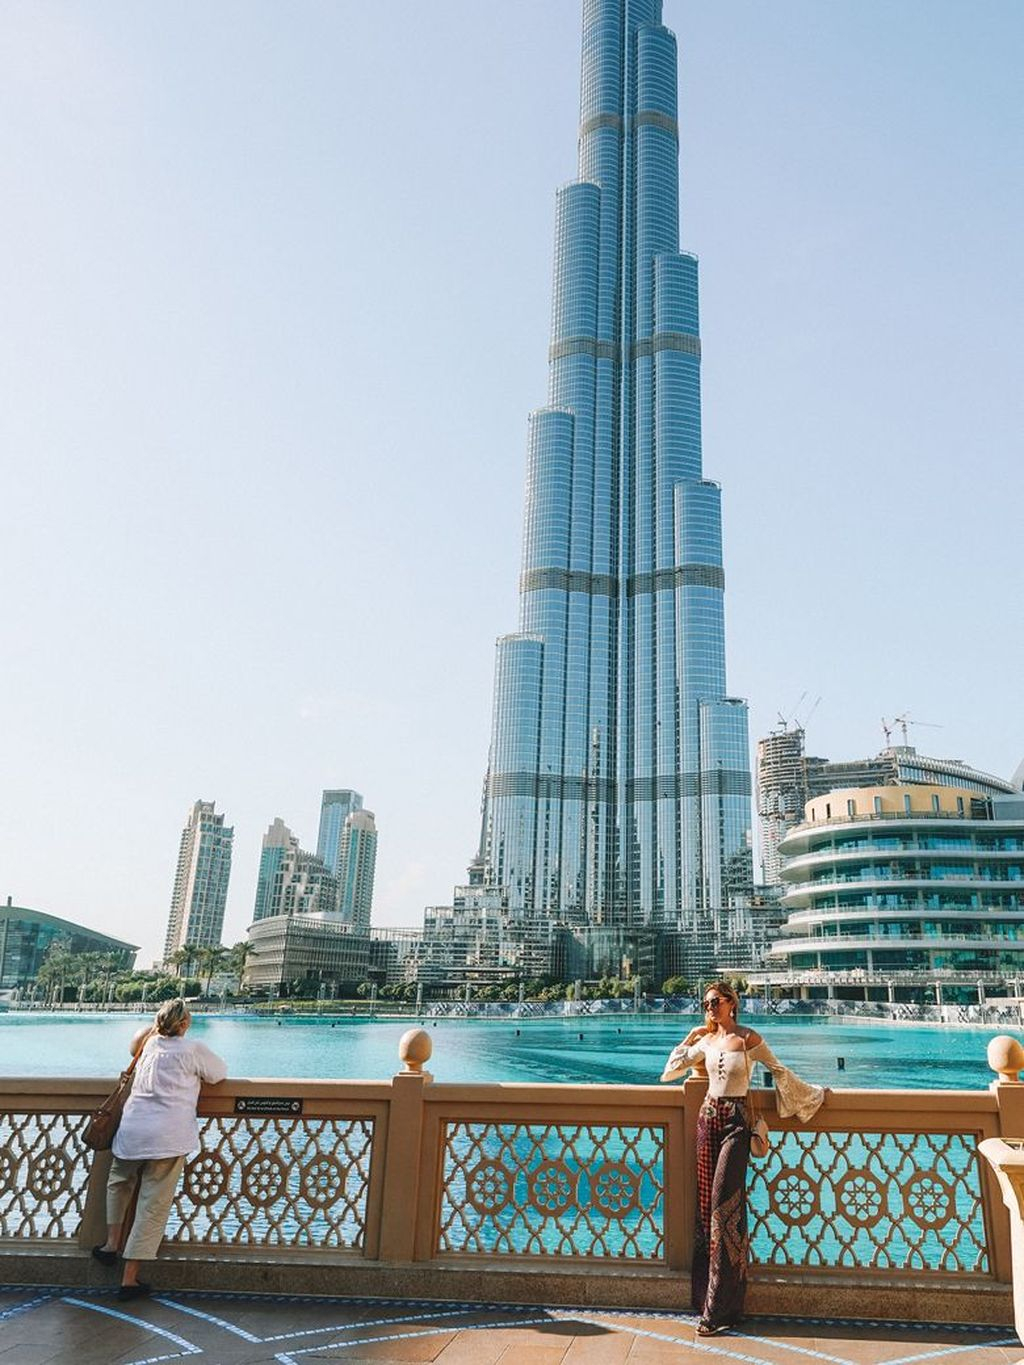 Awesome Photos Of Dubai To Make You Want To Visit It44